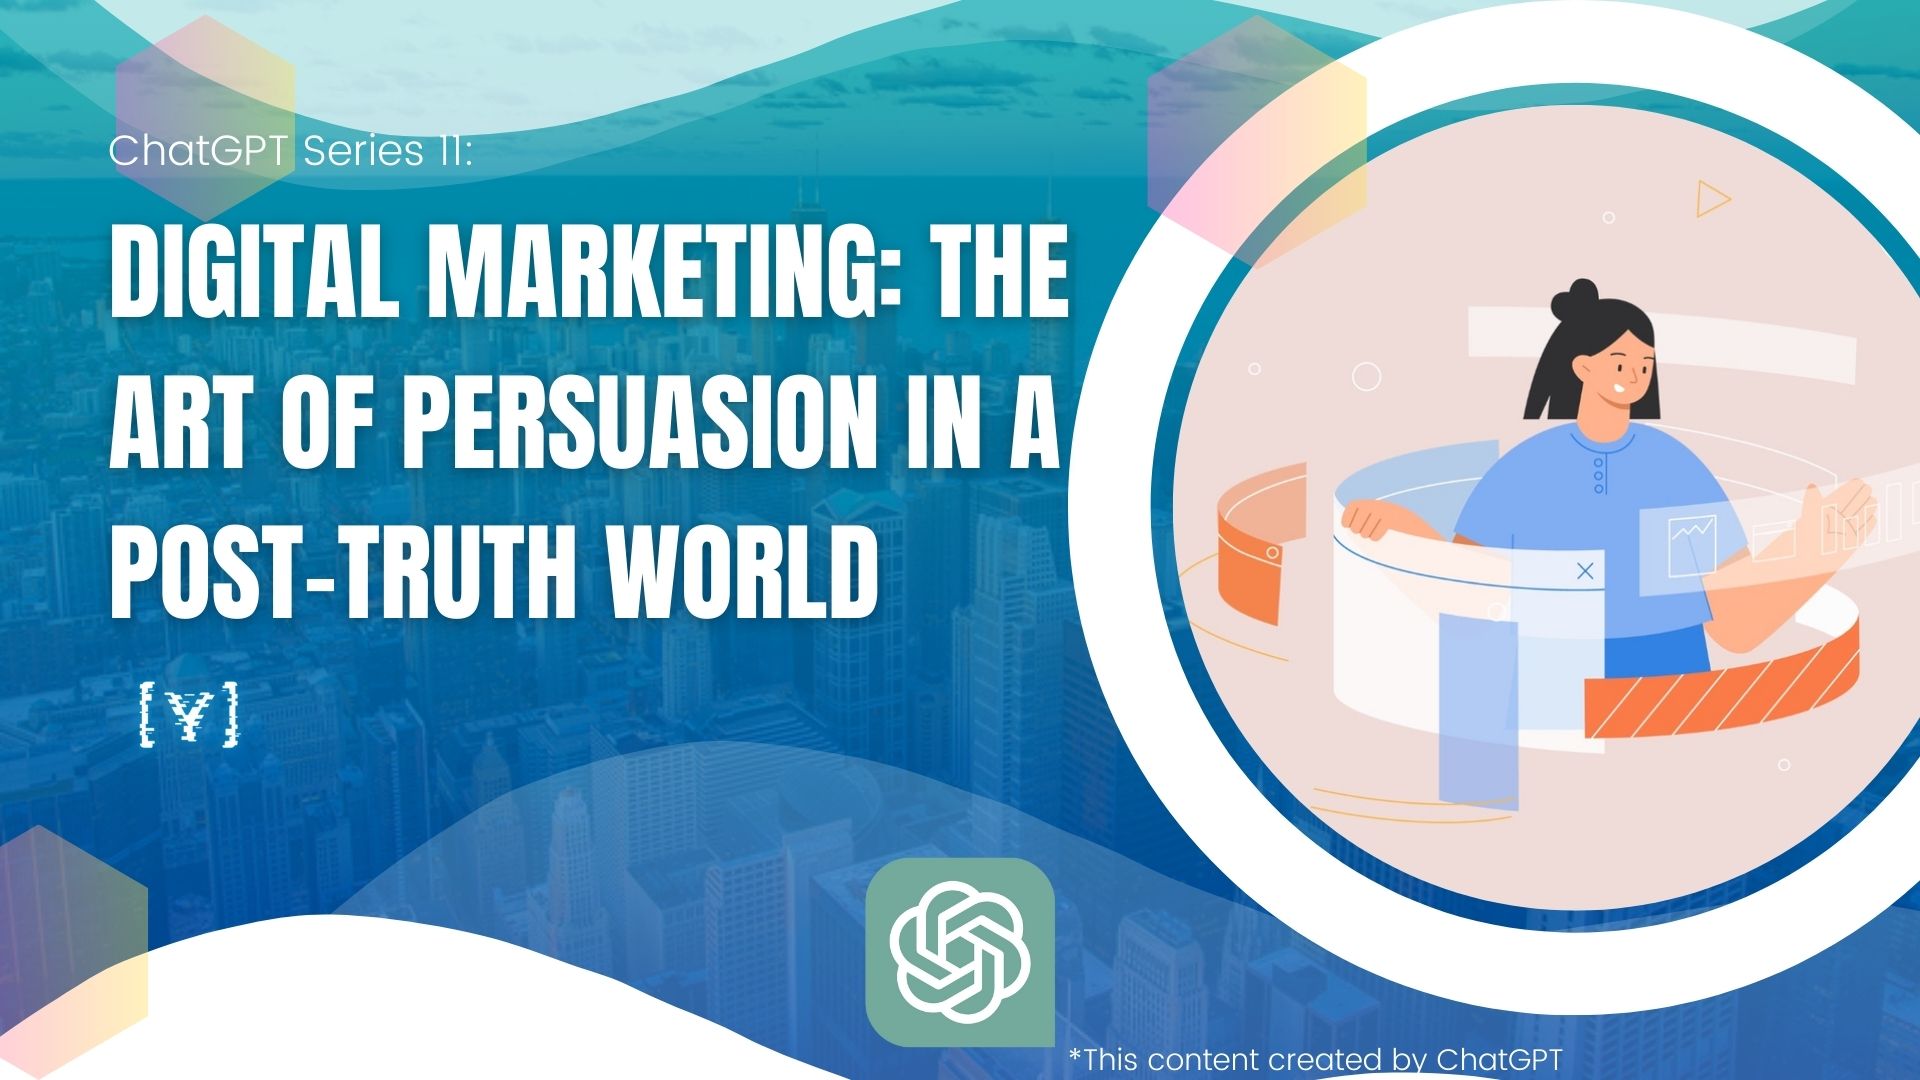 Digital Marketing: The Art of Persuasion in a Post-Truth World